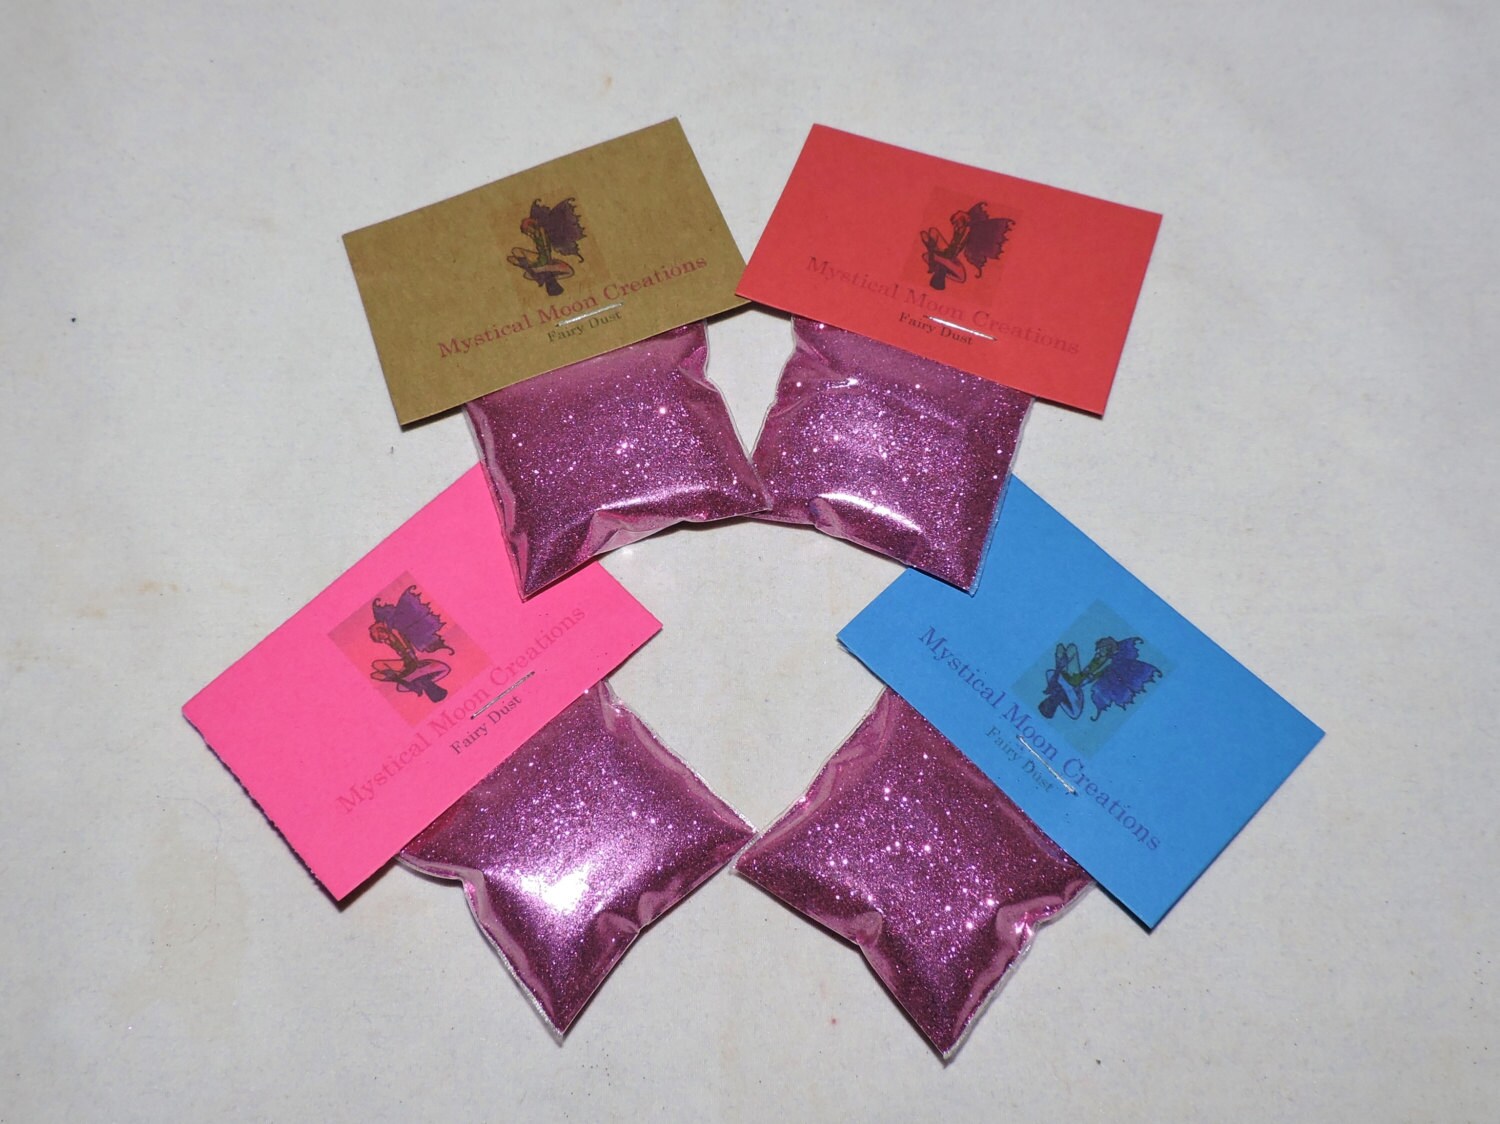 Black Glitter Fairy Dust For Binding, Hexing, Protecting Yourself